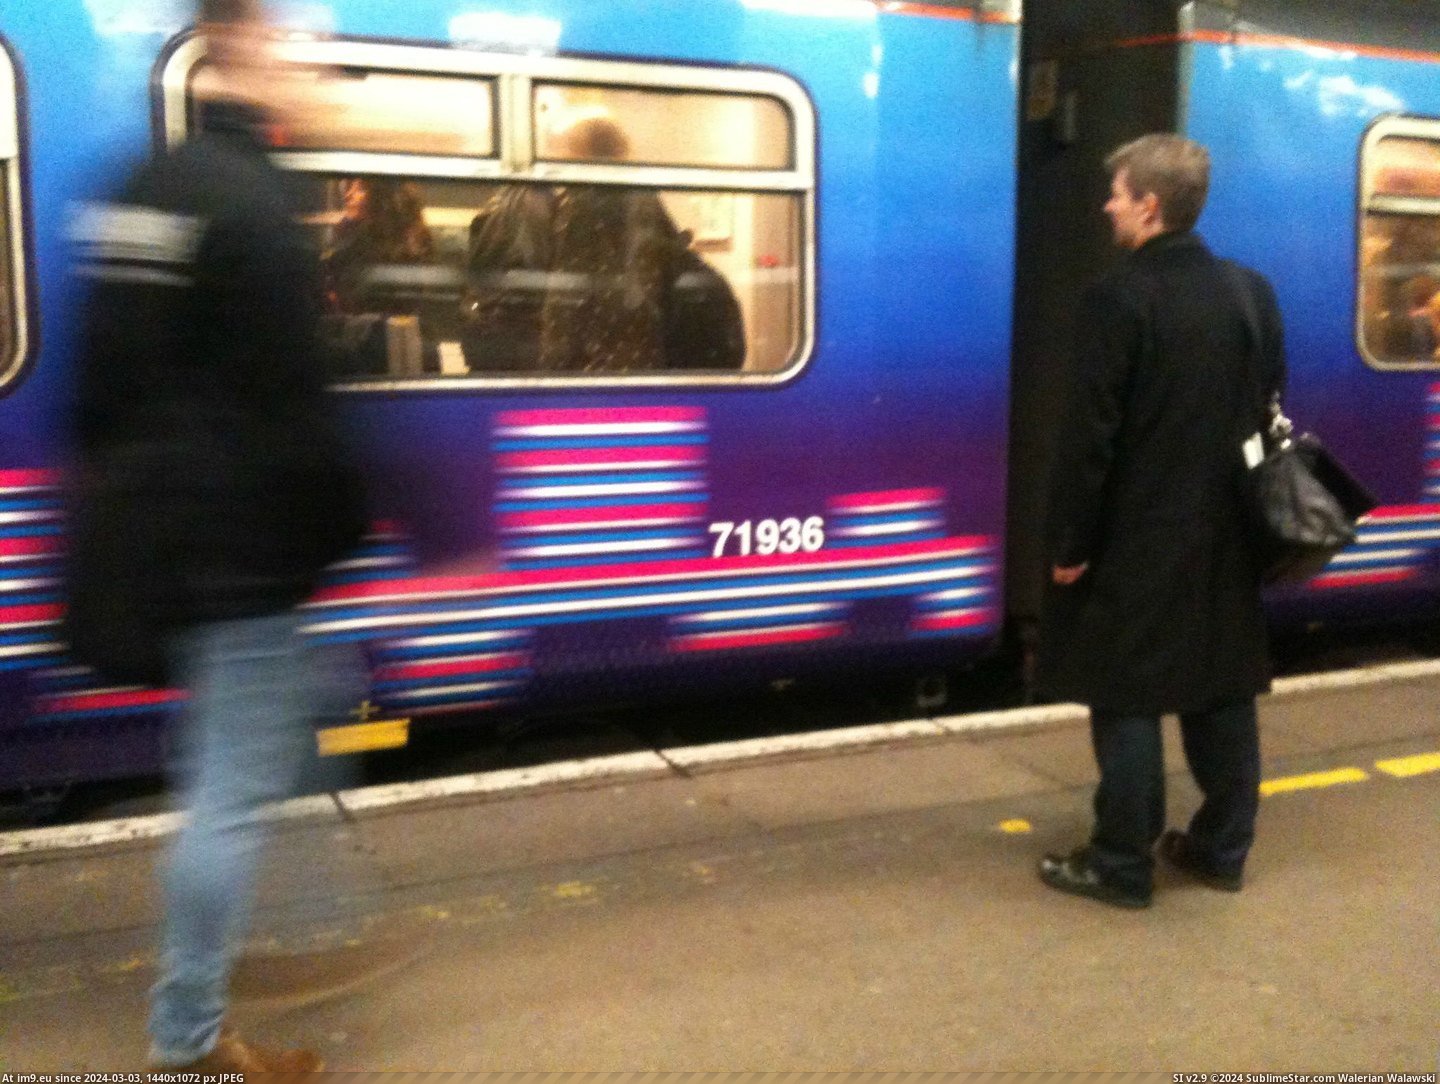 #Moving #Train #Blurry #Stopped #Graphics [Mildlyinteresting] The blurry graphics on this train make it look like it's moving when the train is stopped. Pic. (Obraz z album My r/MILDLYINTERESTING favs))